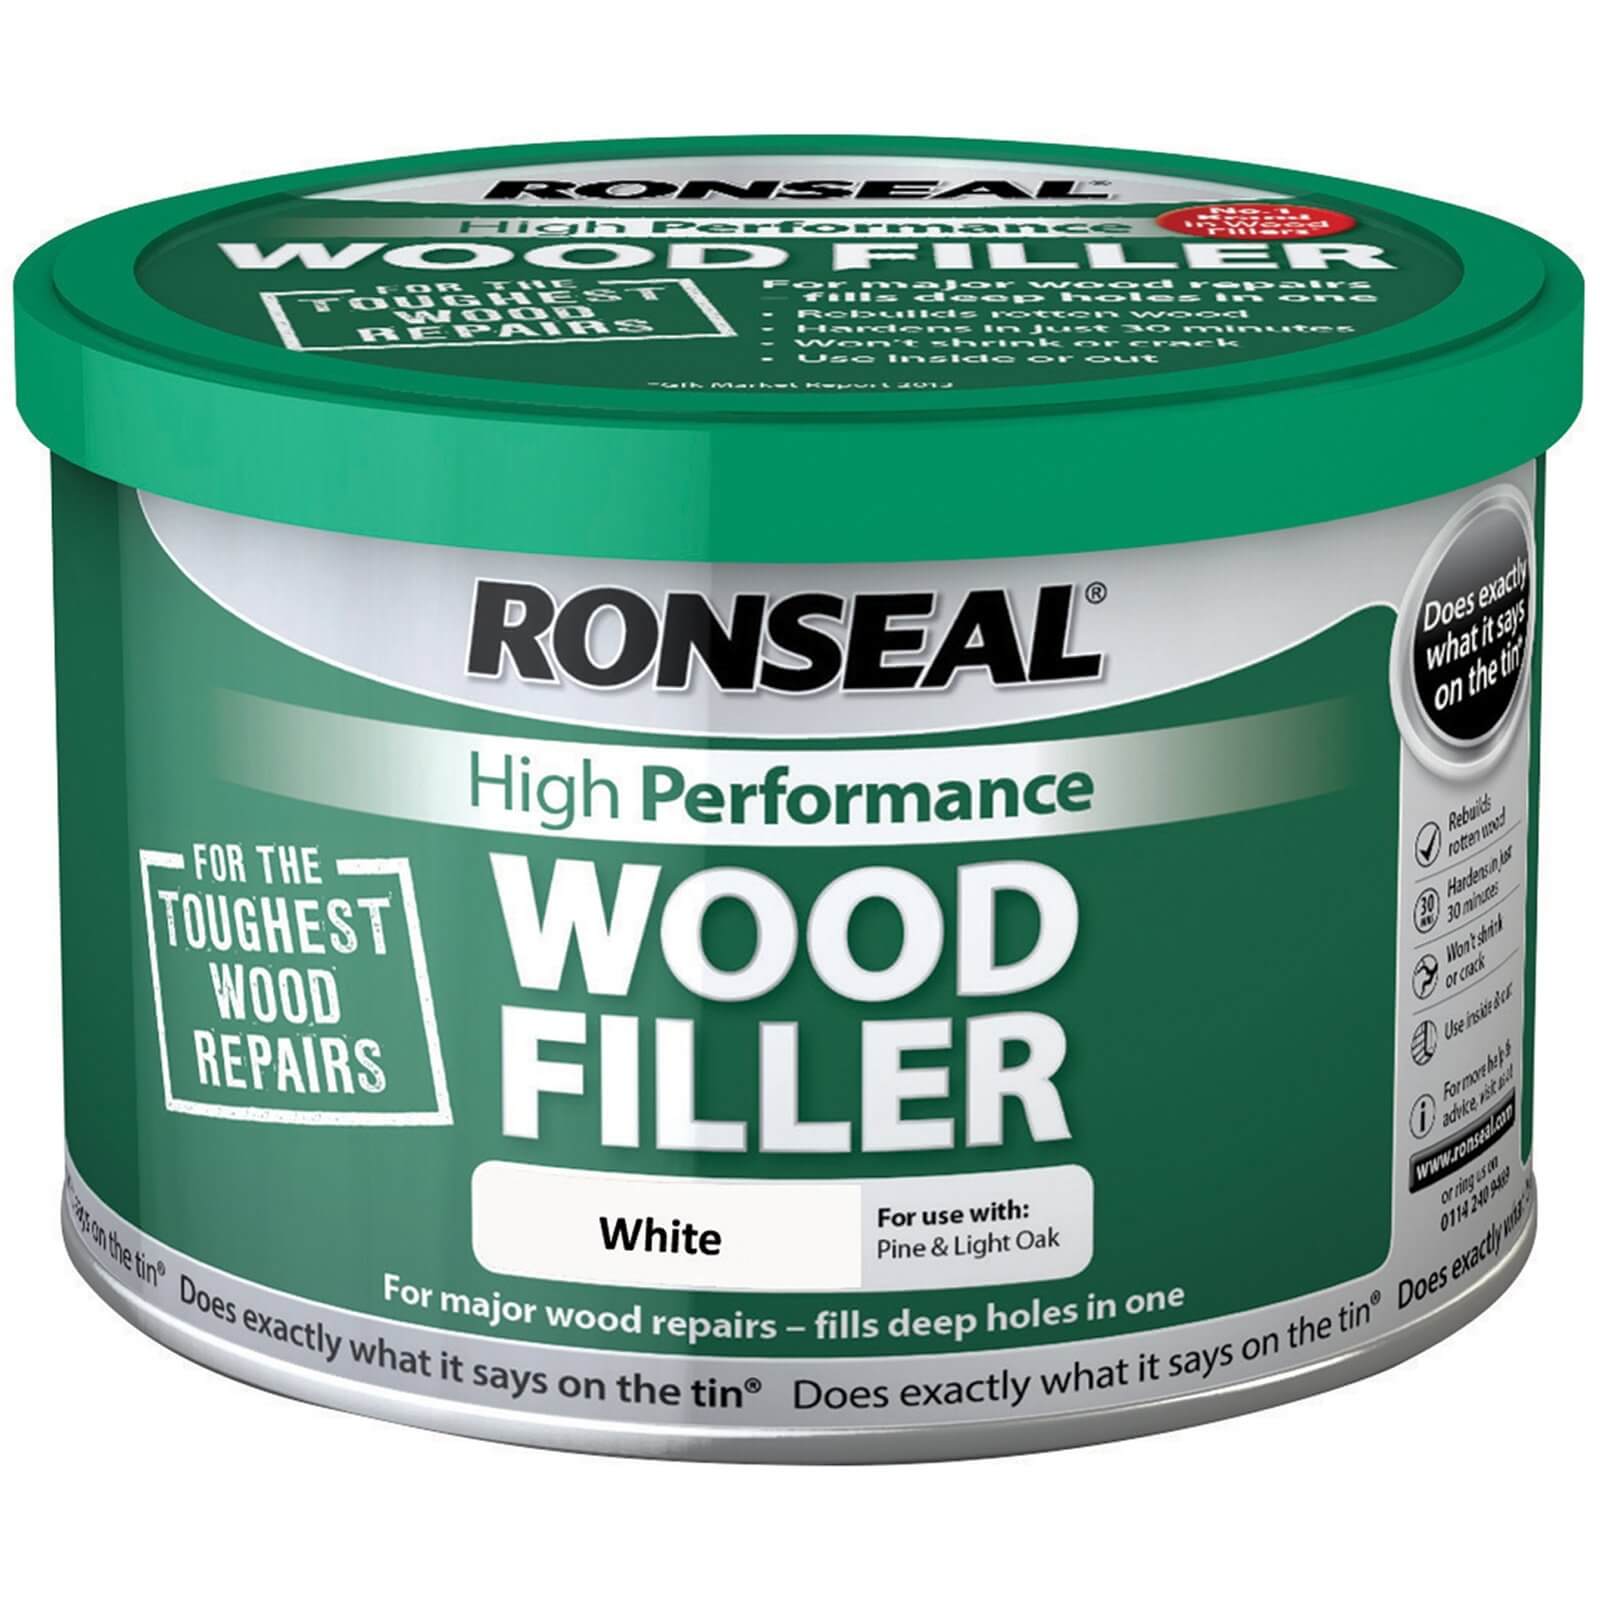 Photo of Ronseal High Performance Wood Filler - White - 275g